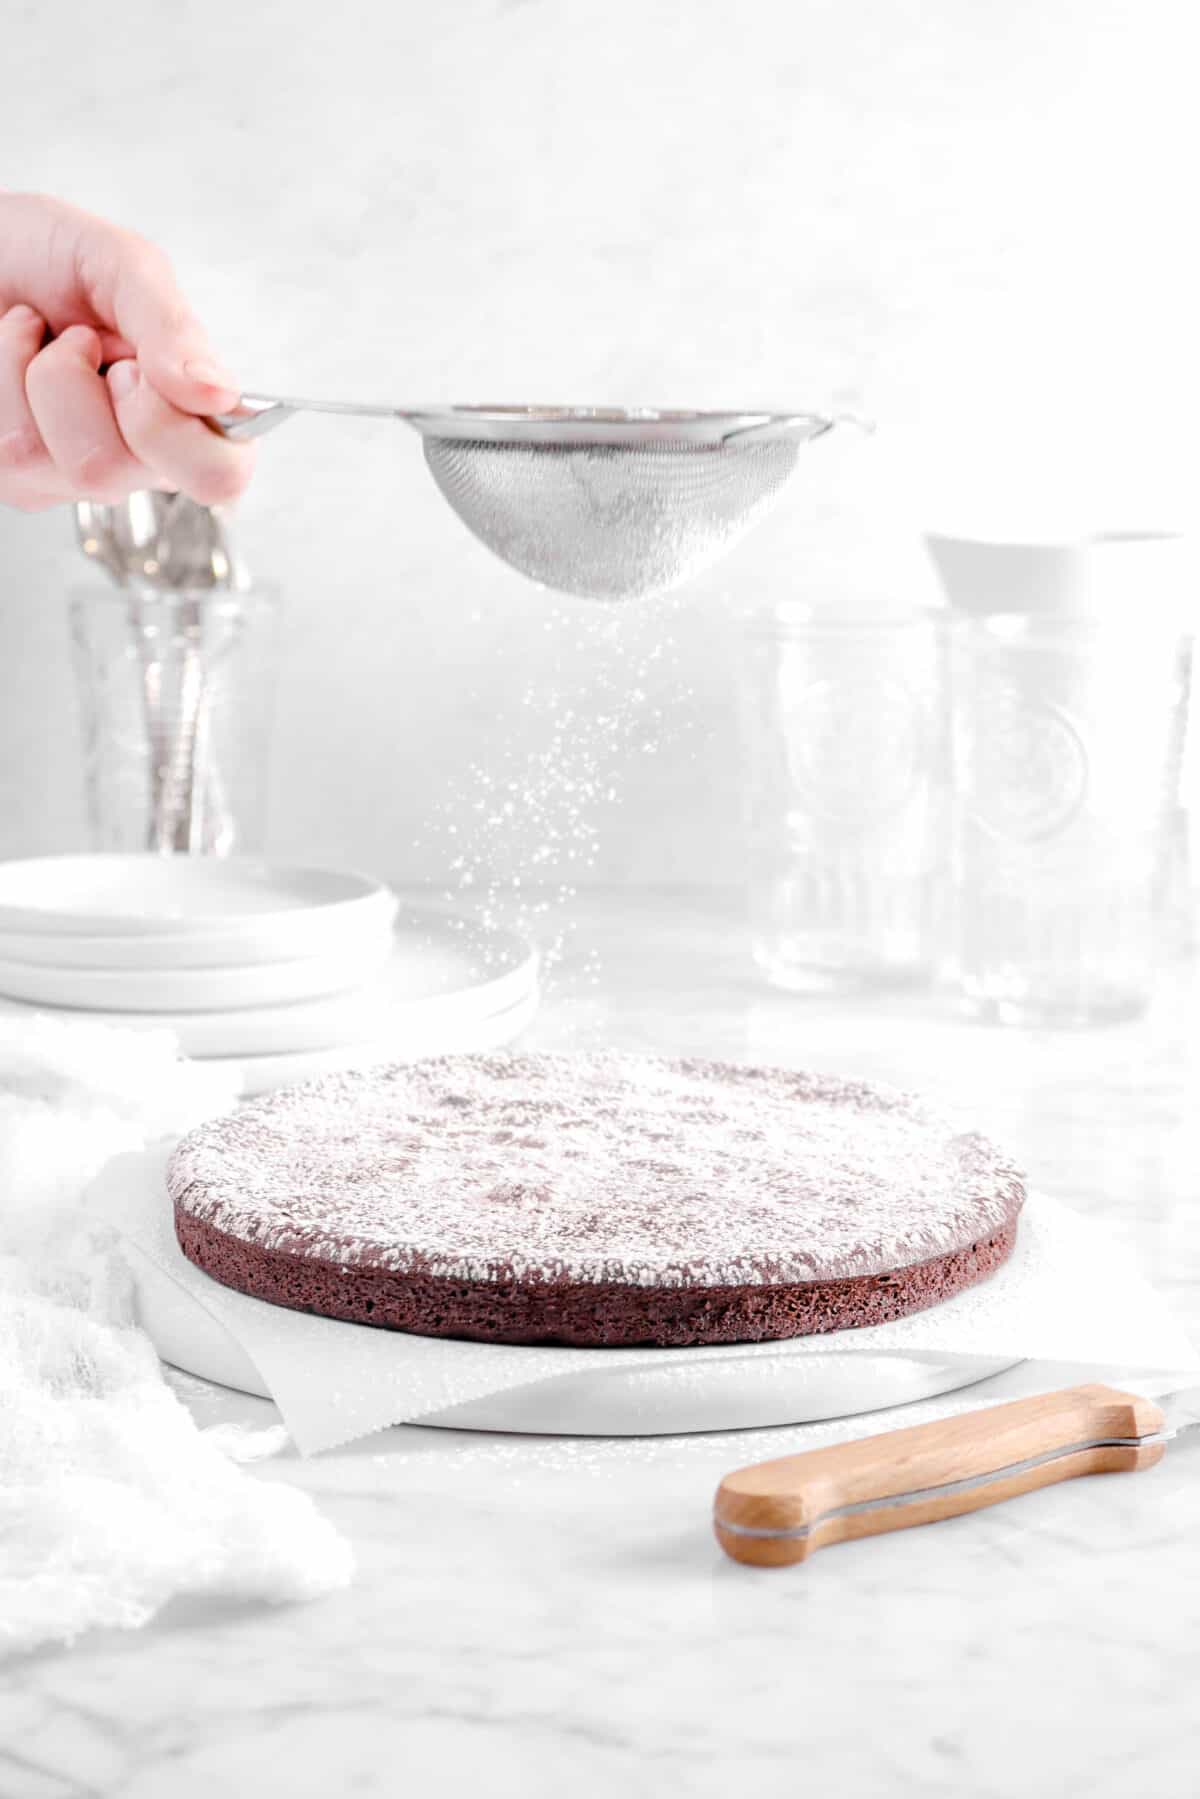 powdered sugar being sifted onto cake with glasses, plates, utensils, and a knife